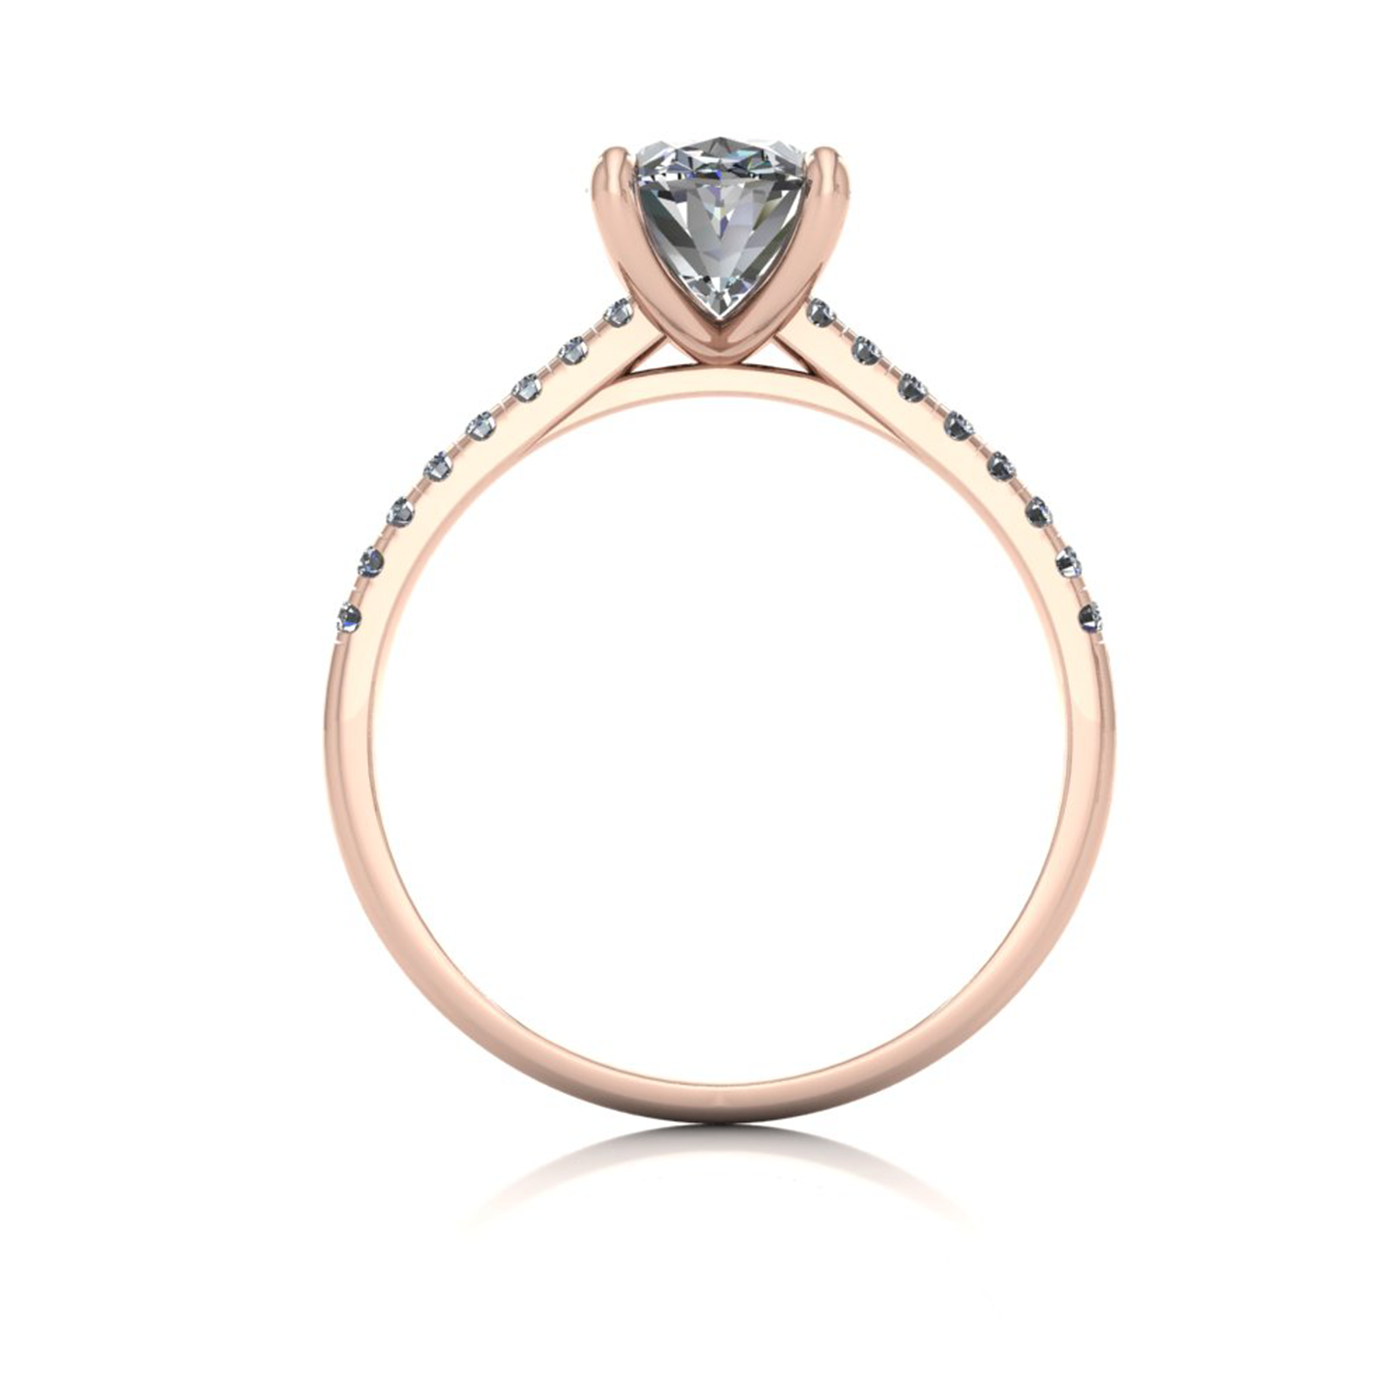 18k rose gold  1,50 ct 4 prongs oval cut diamond engagement ring with whisper thin pavÉ set band Photos & images